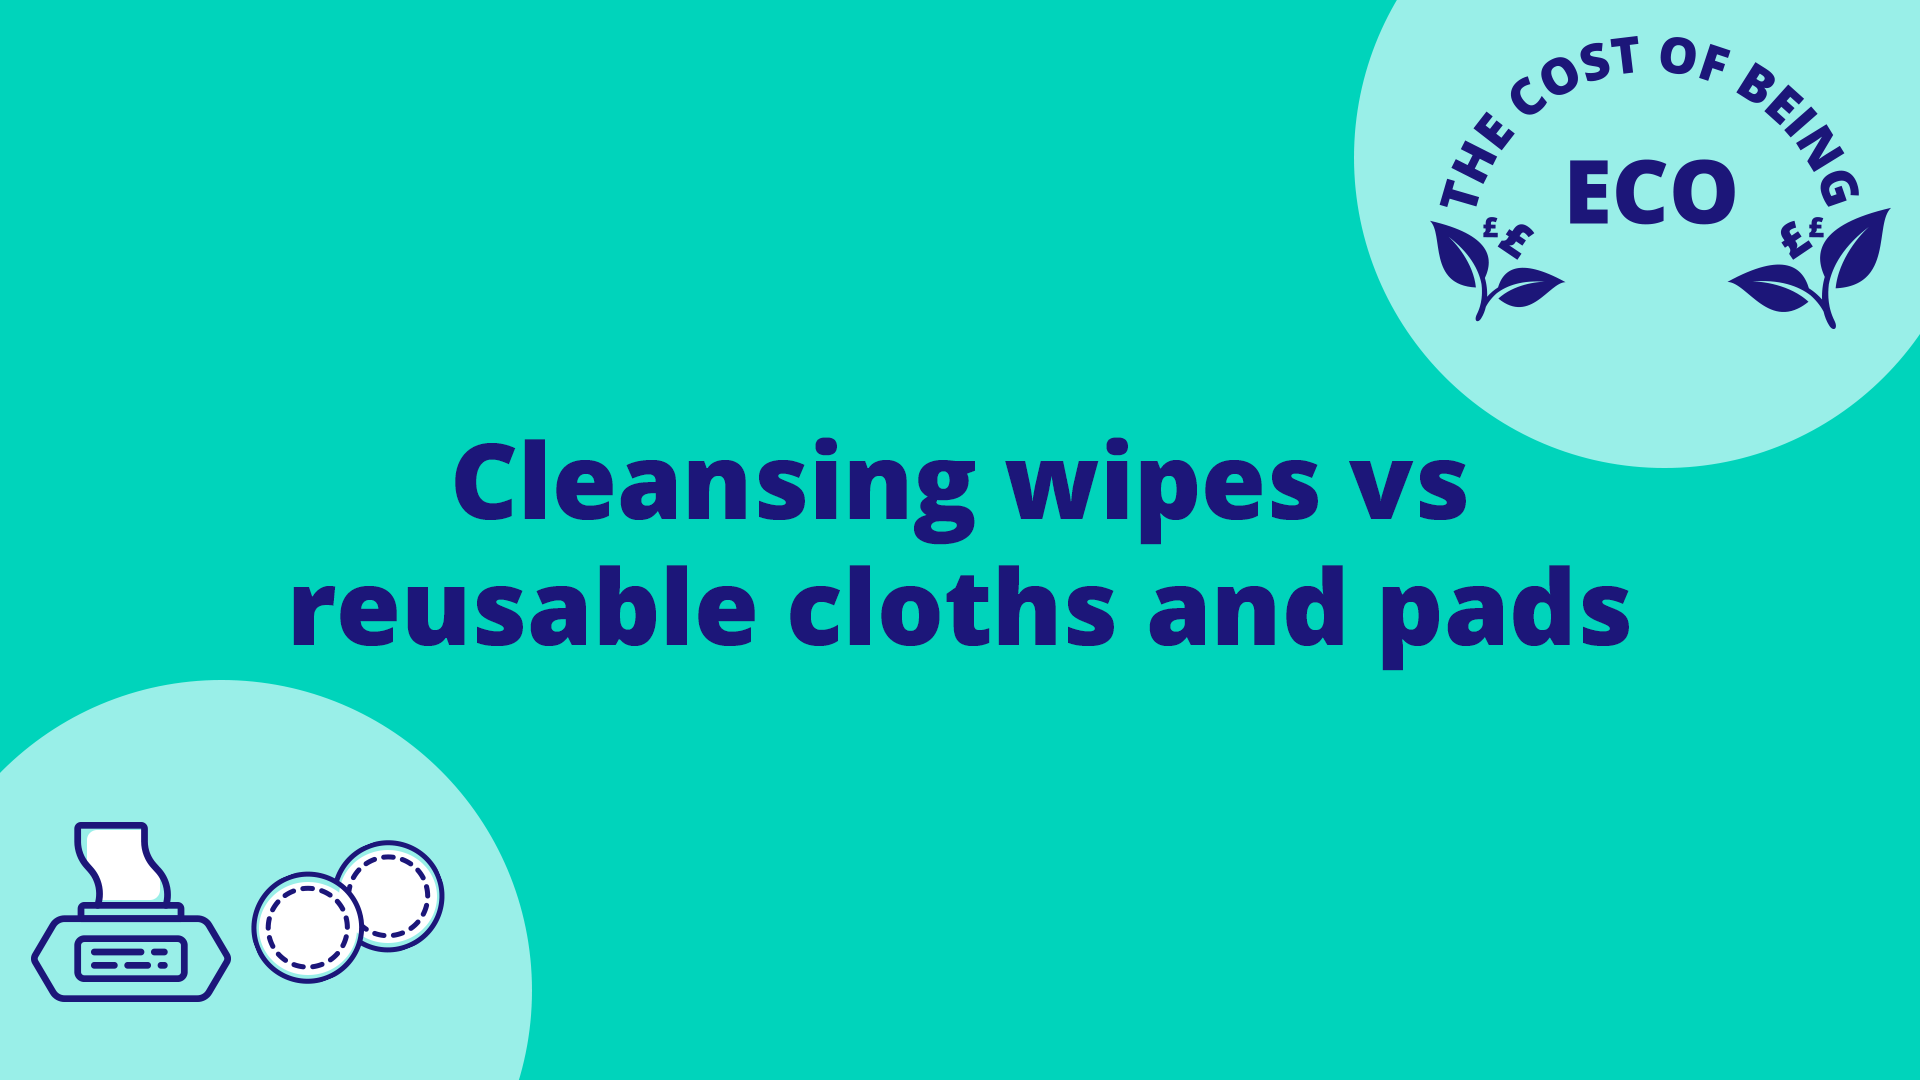 Featured image for The cost of being eco: reusable wipes